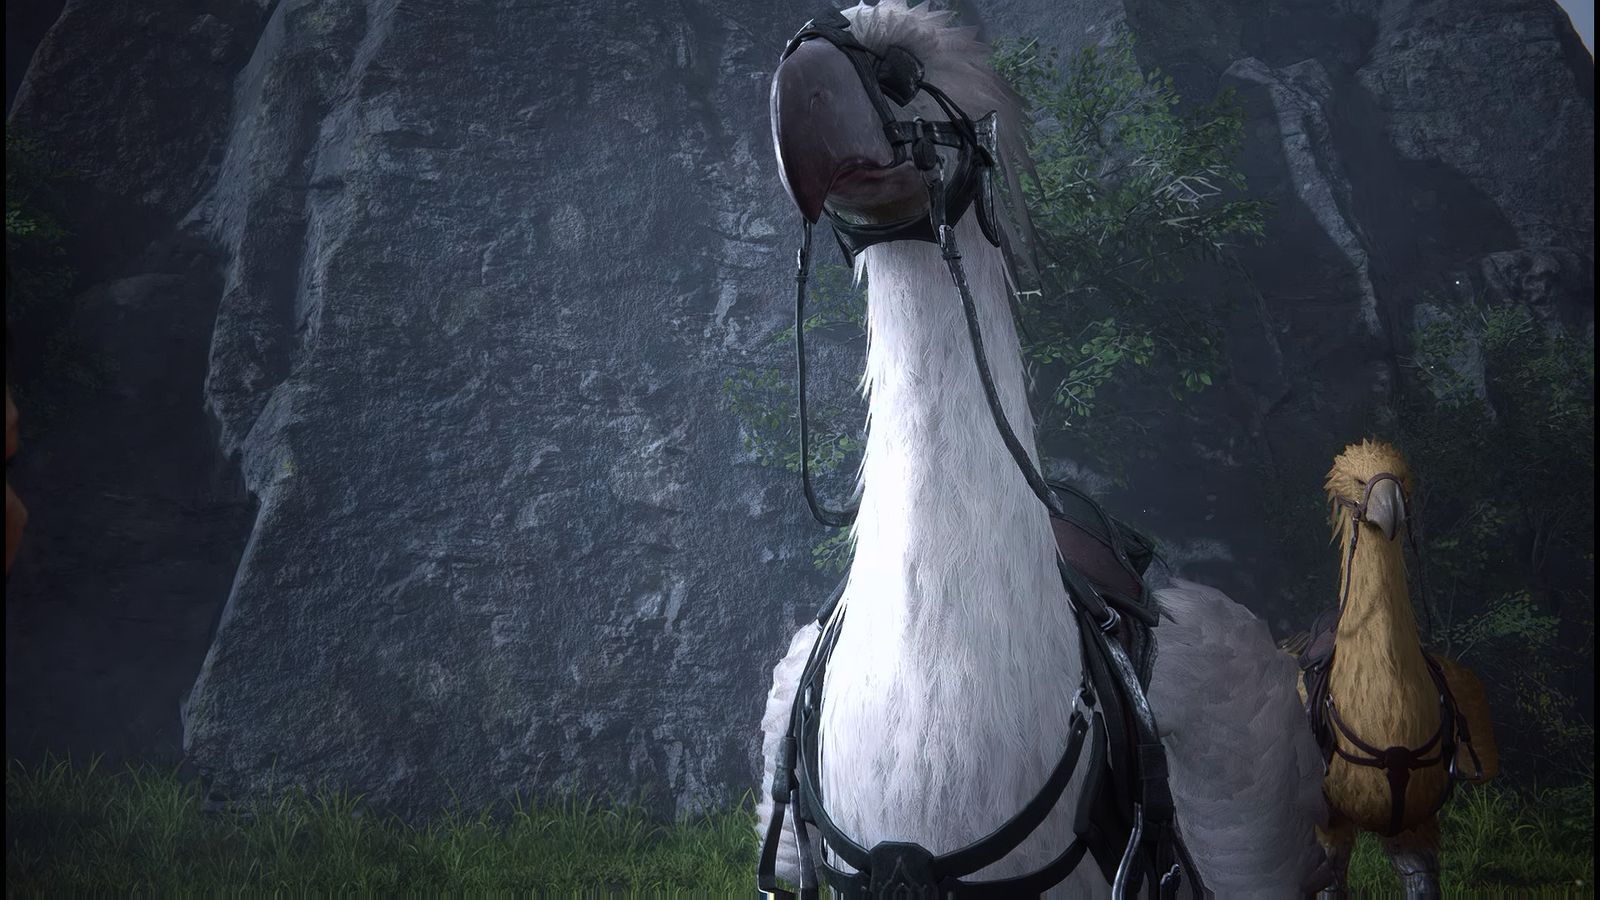 A Chocobo in Final Fantasy 16